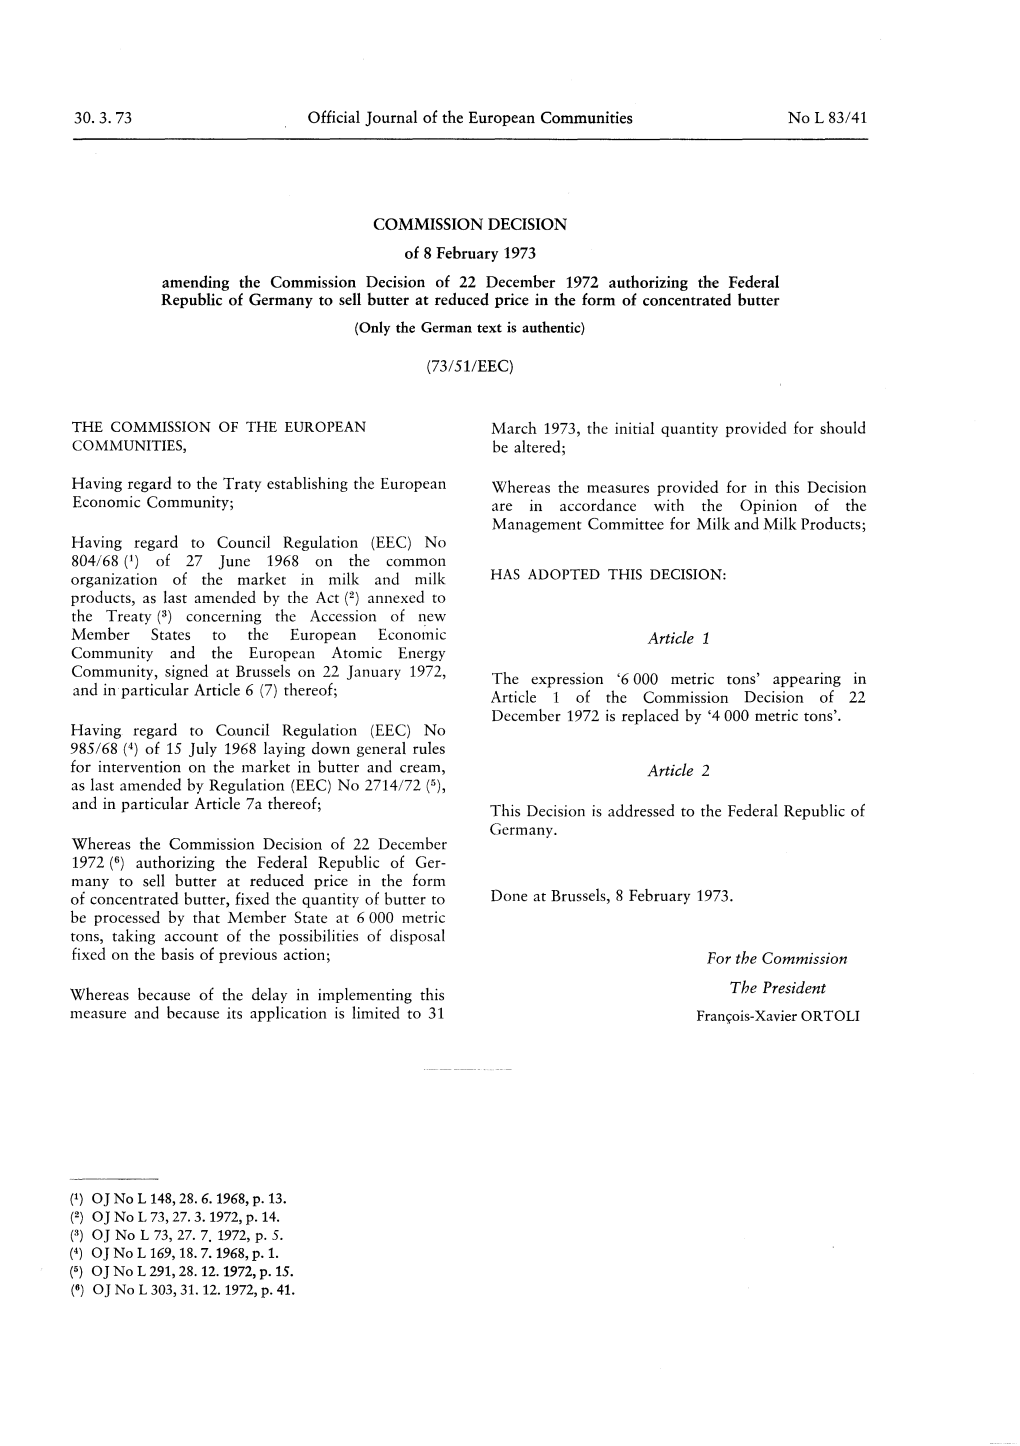 Official Journal of the European Communities of 8 February 1973 Amending the Commission Decision of 22 December 1972 Authorizing